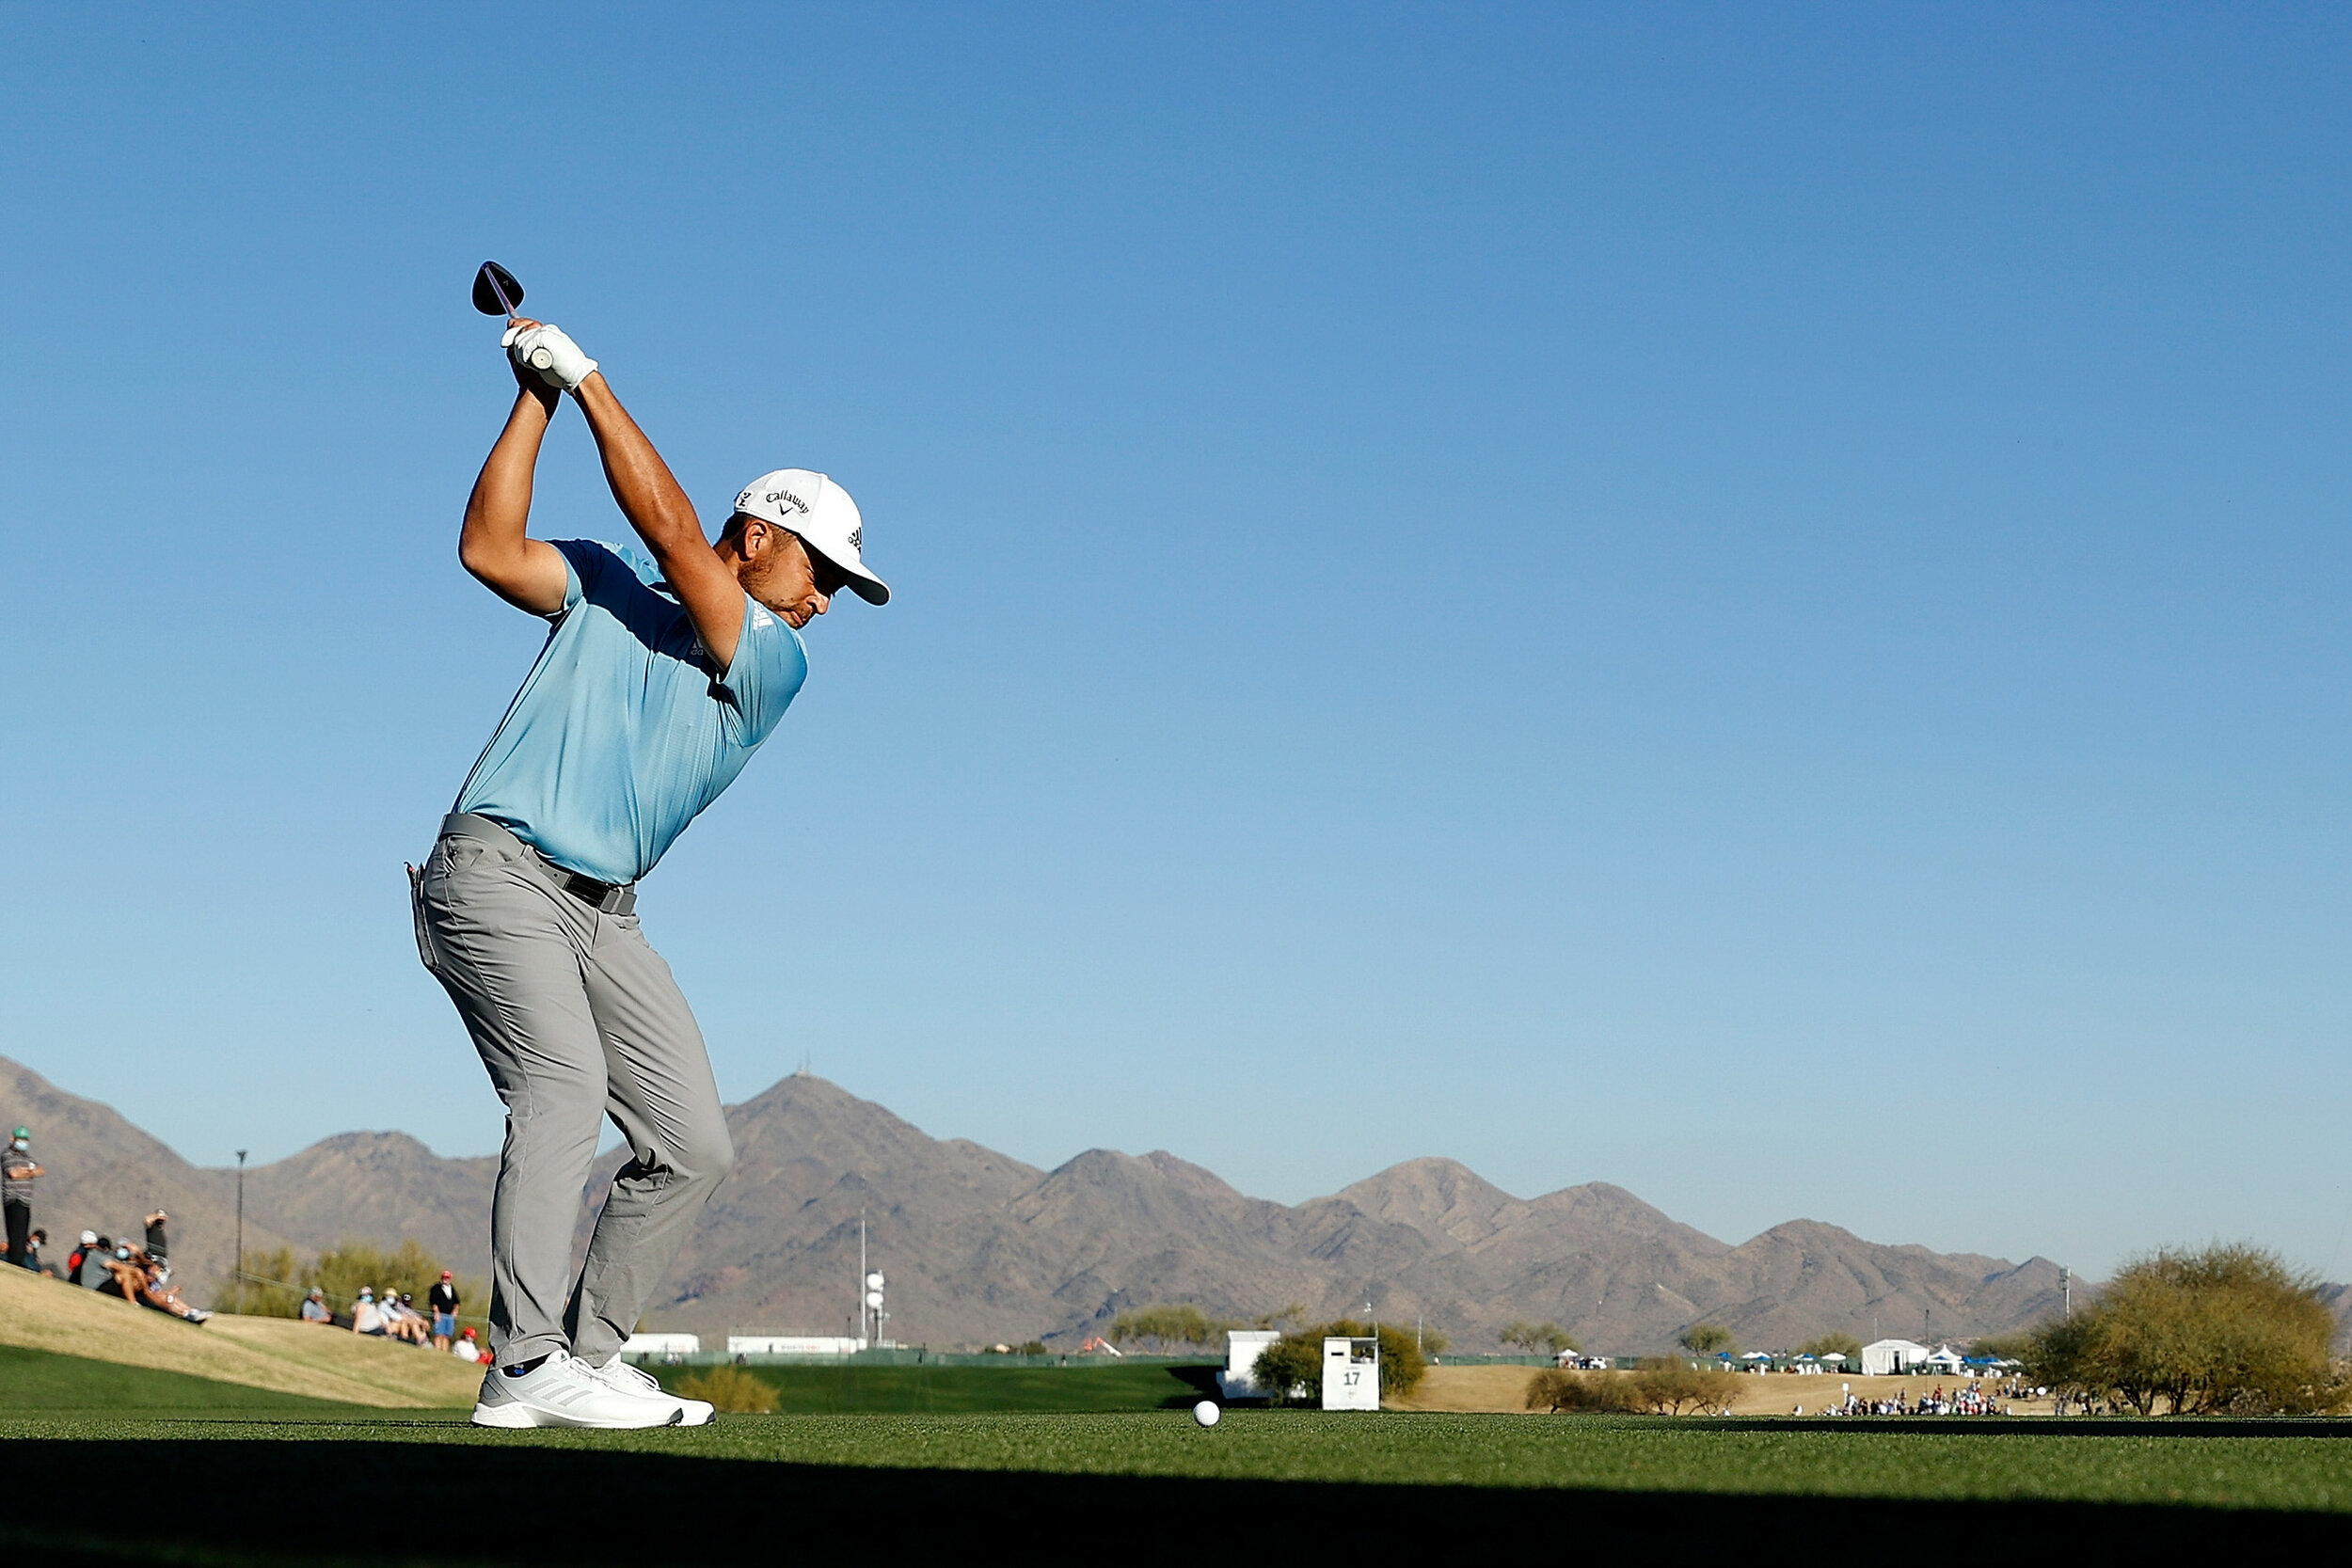  SCOTTSDALE, ARIZONA - FEBRUARY 05:  Xander Schauffele of the United States hits his tee shot on the 17th hole during the second round of the Waste Management Phoenix Open at TPC Scottsdale on February 05, 2021 in Scottsdale, Arizona. (Photo by Chris